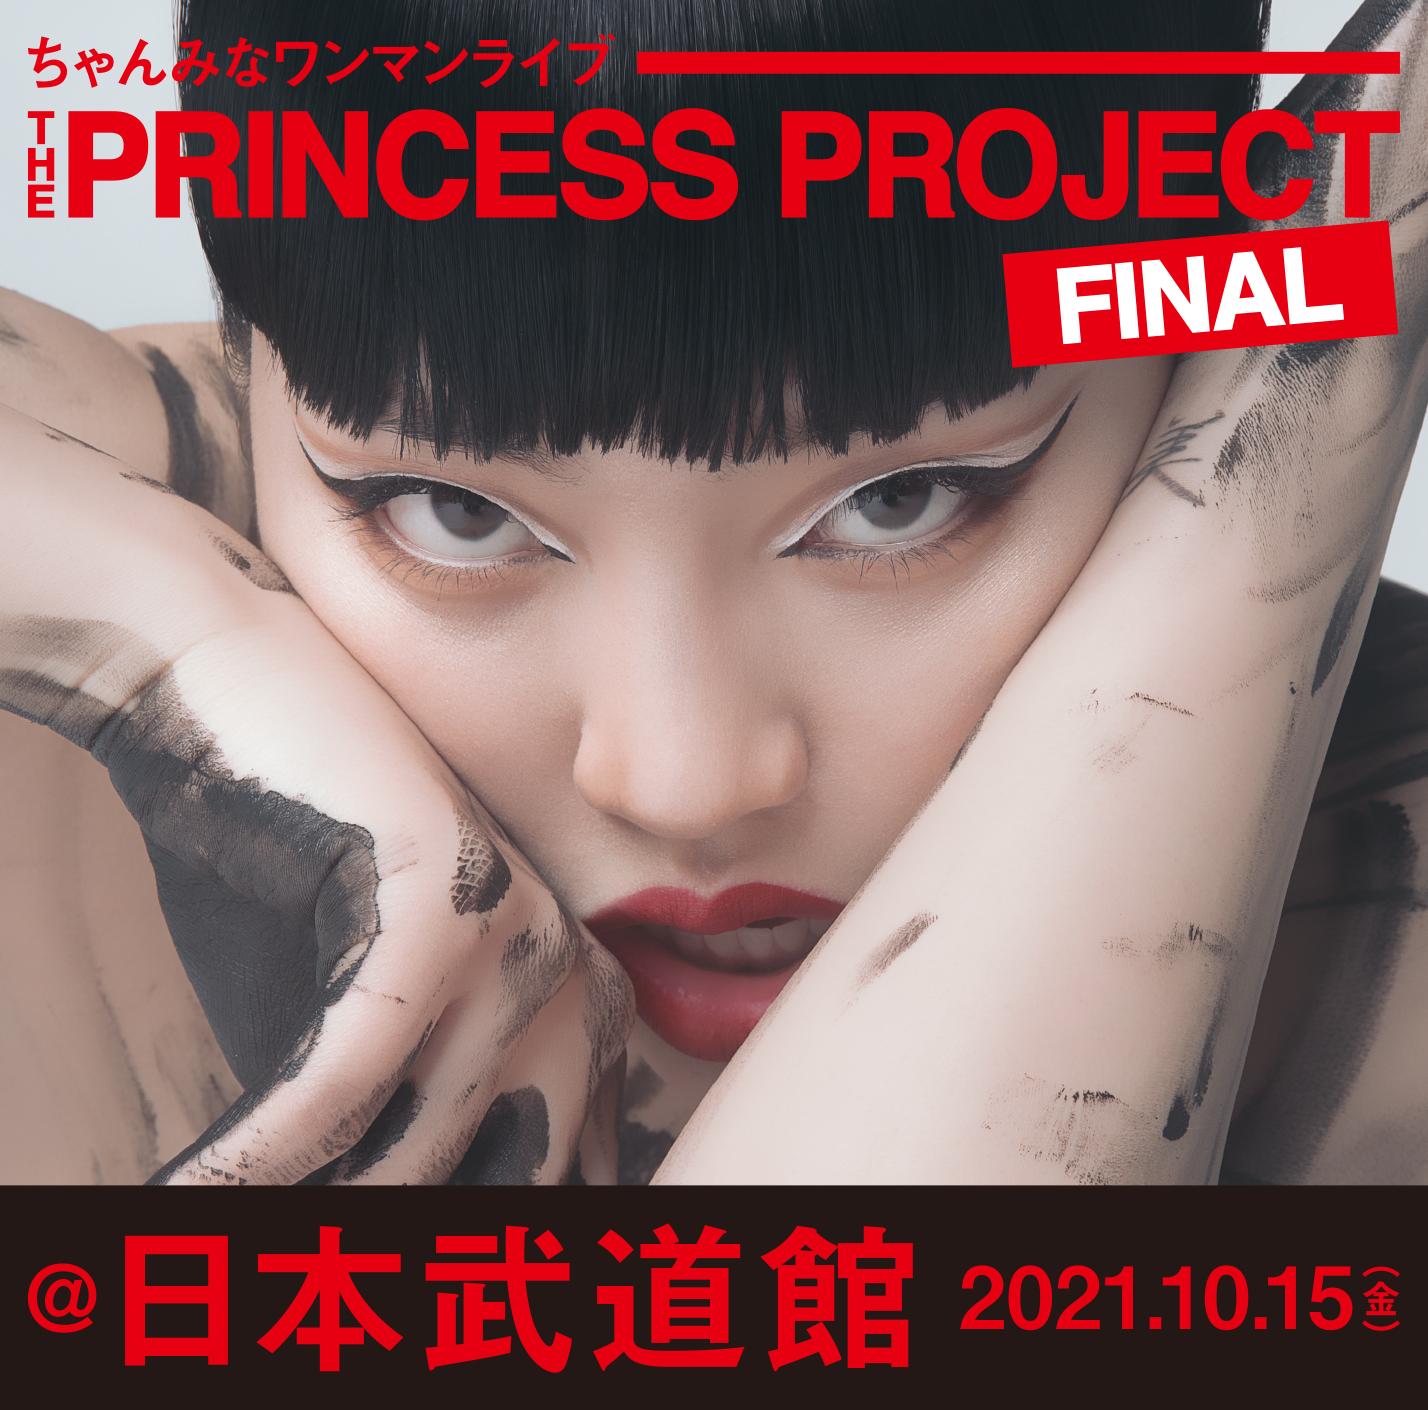 『THE PRINCESS PROJECT - FINAL -』 チケットファンクラブ先行受付開始！